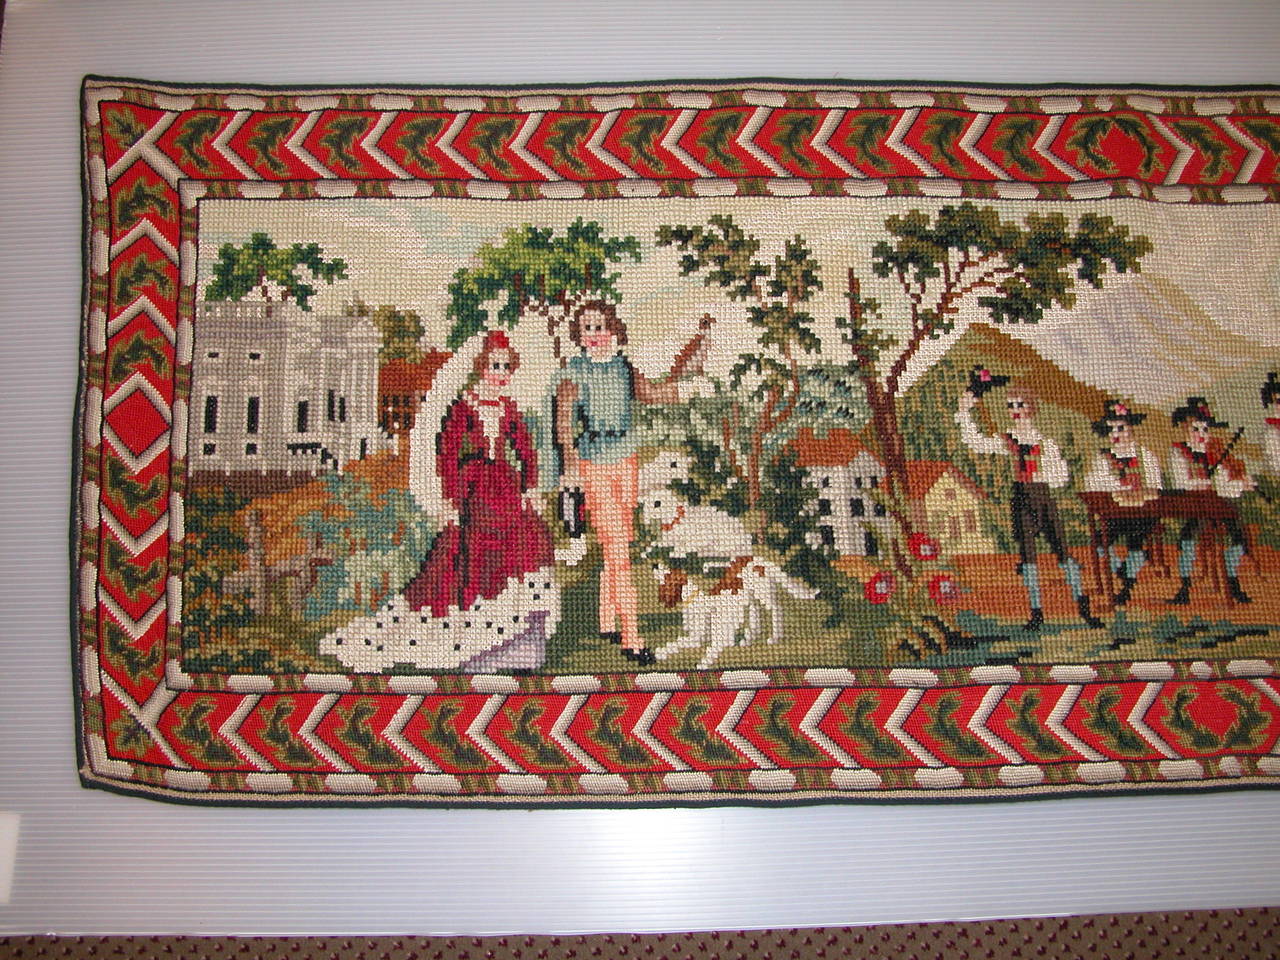 This needlepoint panel measures 26 x 77 and is in amazing condition considering that we feel that it likely dates to the 1920s. We have no idea on where it was made, but it depicts scenes of 19th century country life in what we feel might be